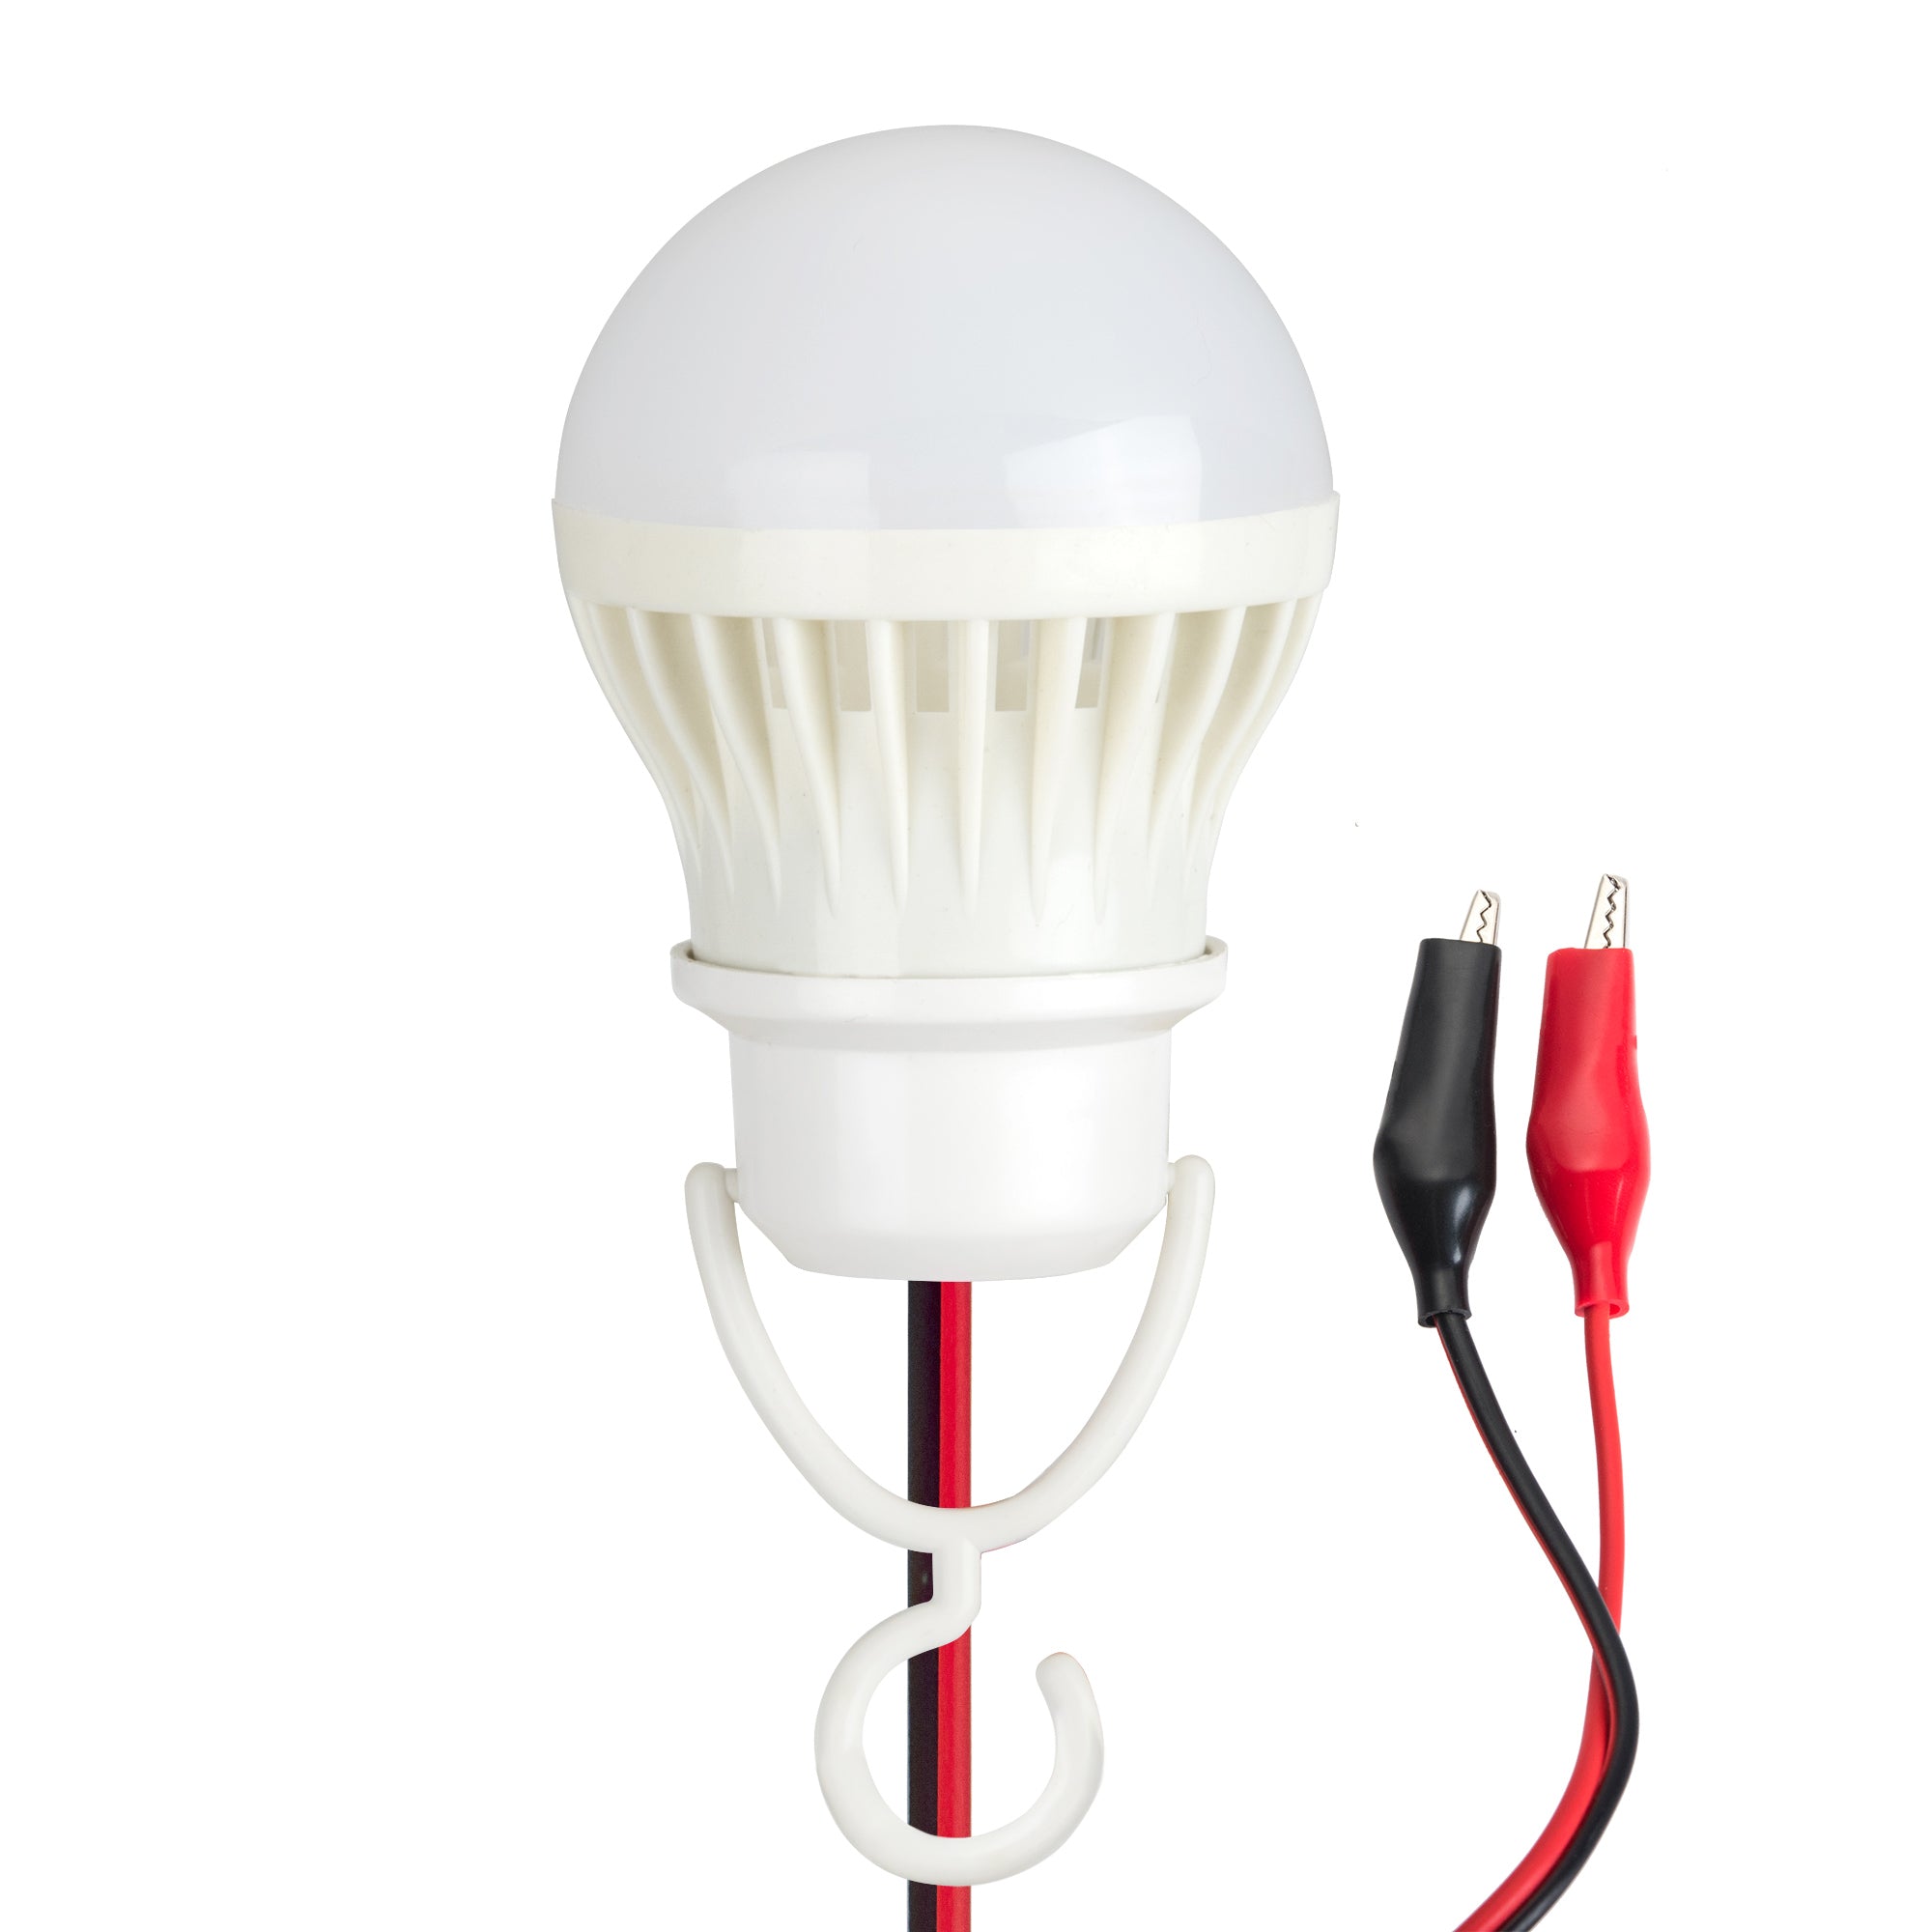 6V Battery 3W Powerful LED Bulb w Wire and Clip - 12VMonster Lighting